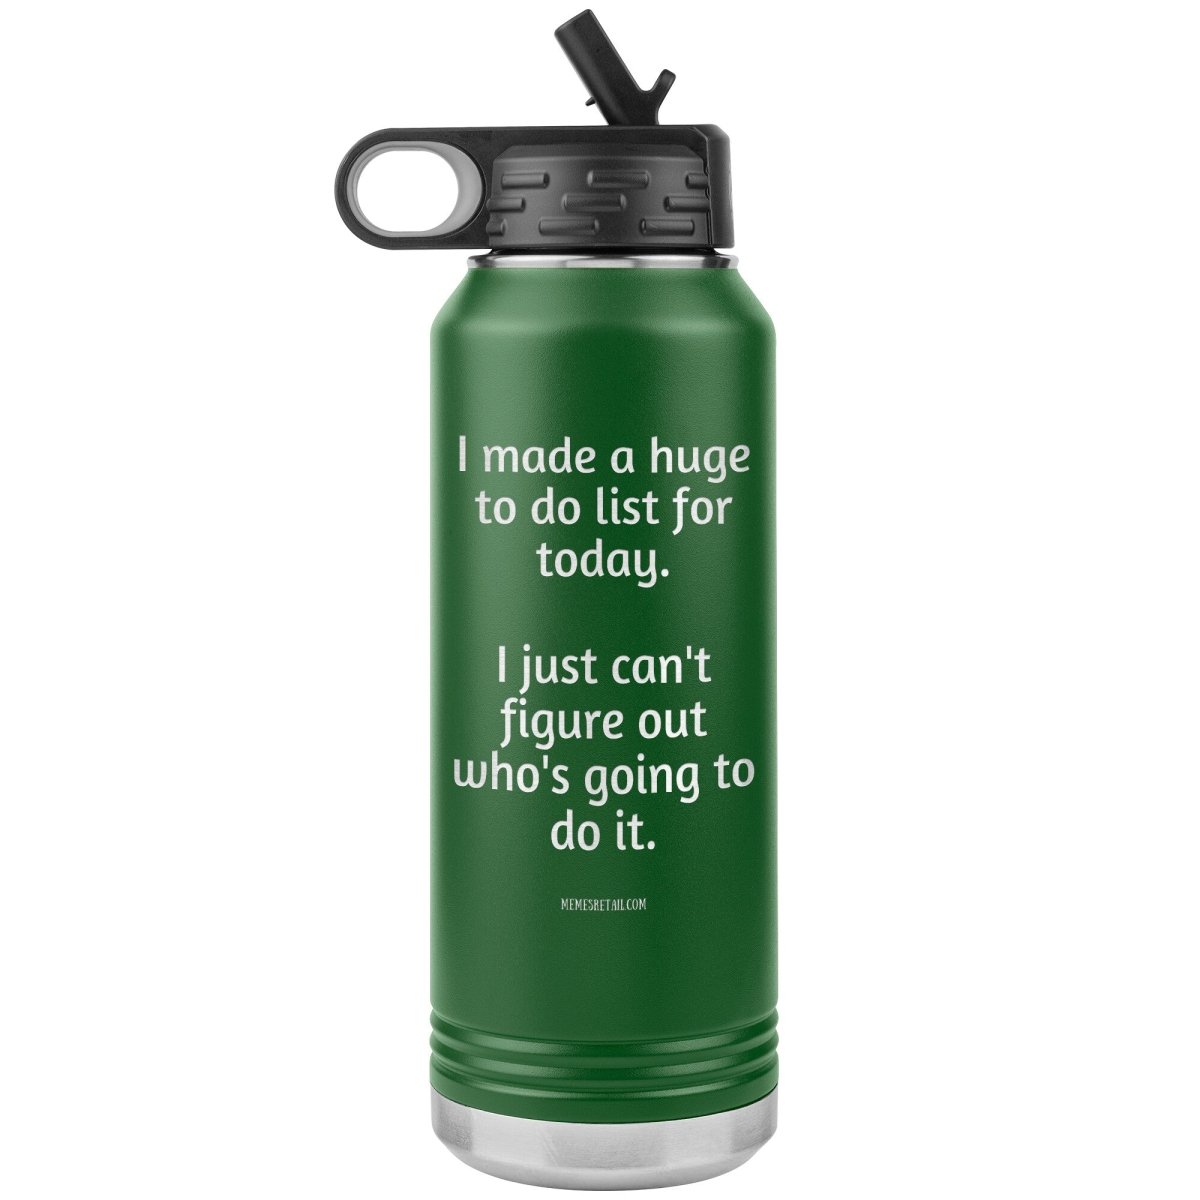 I made a huge to do list for today. I just can't figure out who's going to do it. 32 oz Water Tumbler, Green - MemesRetail.com